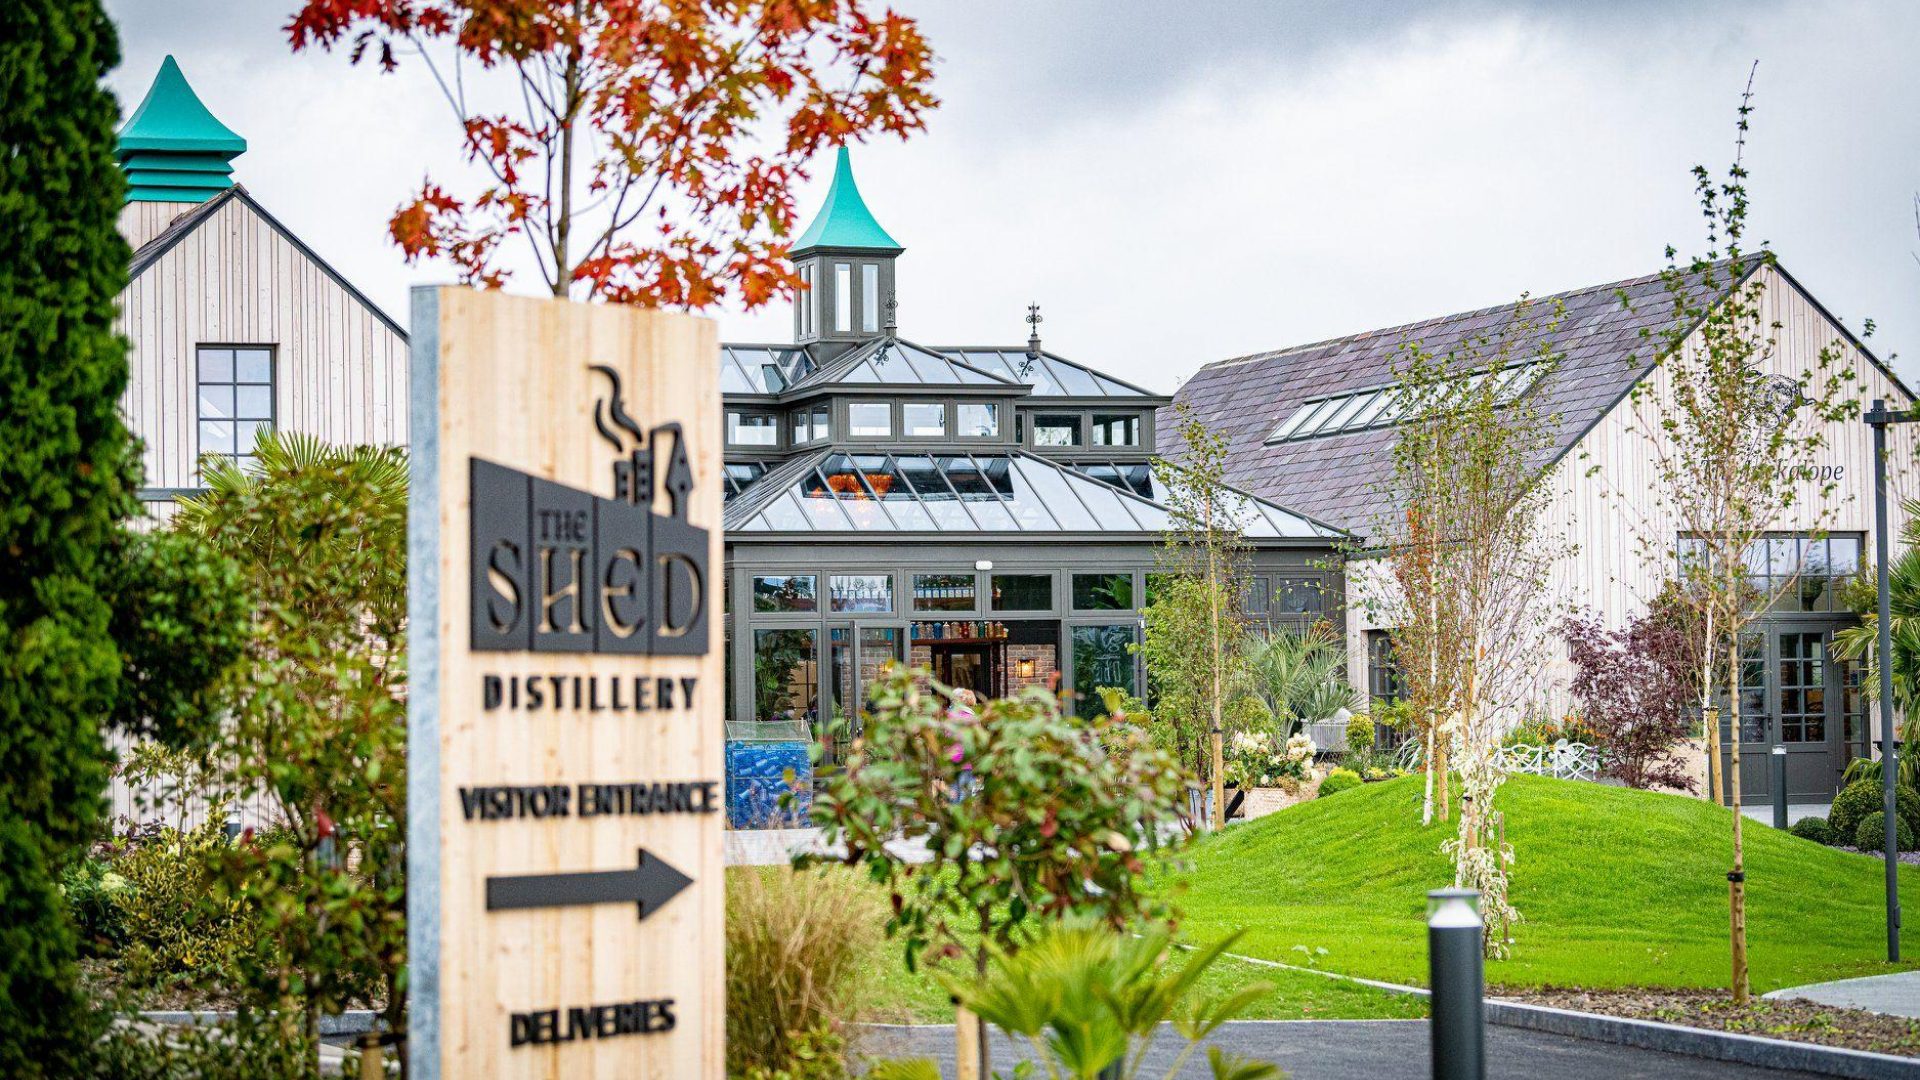 shed distillery tour